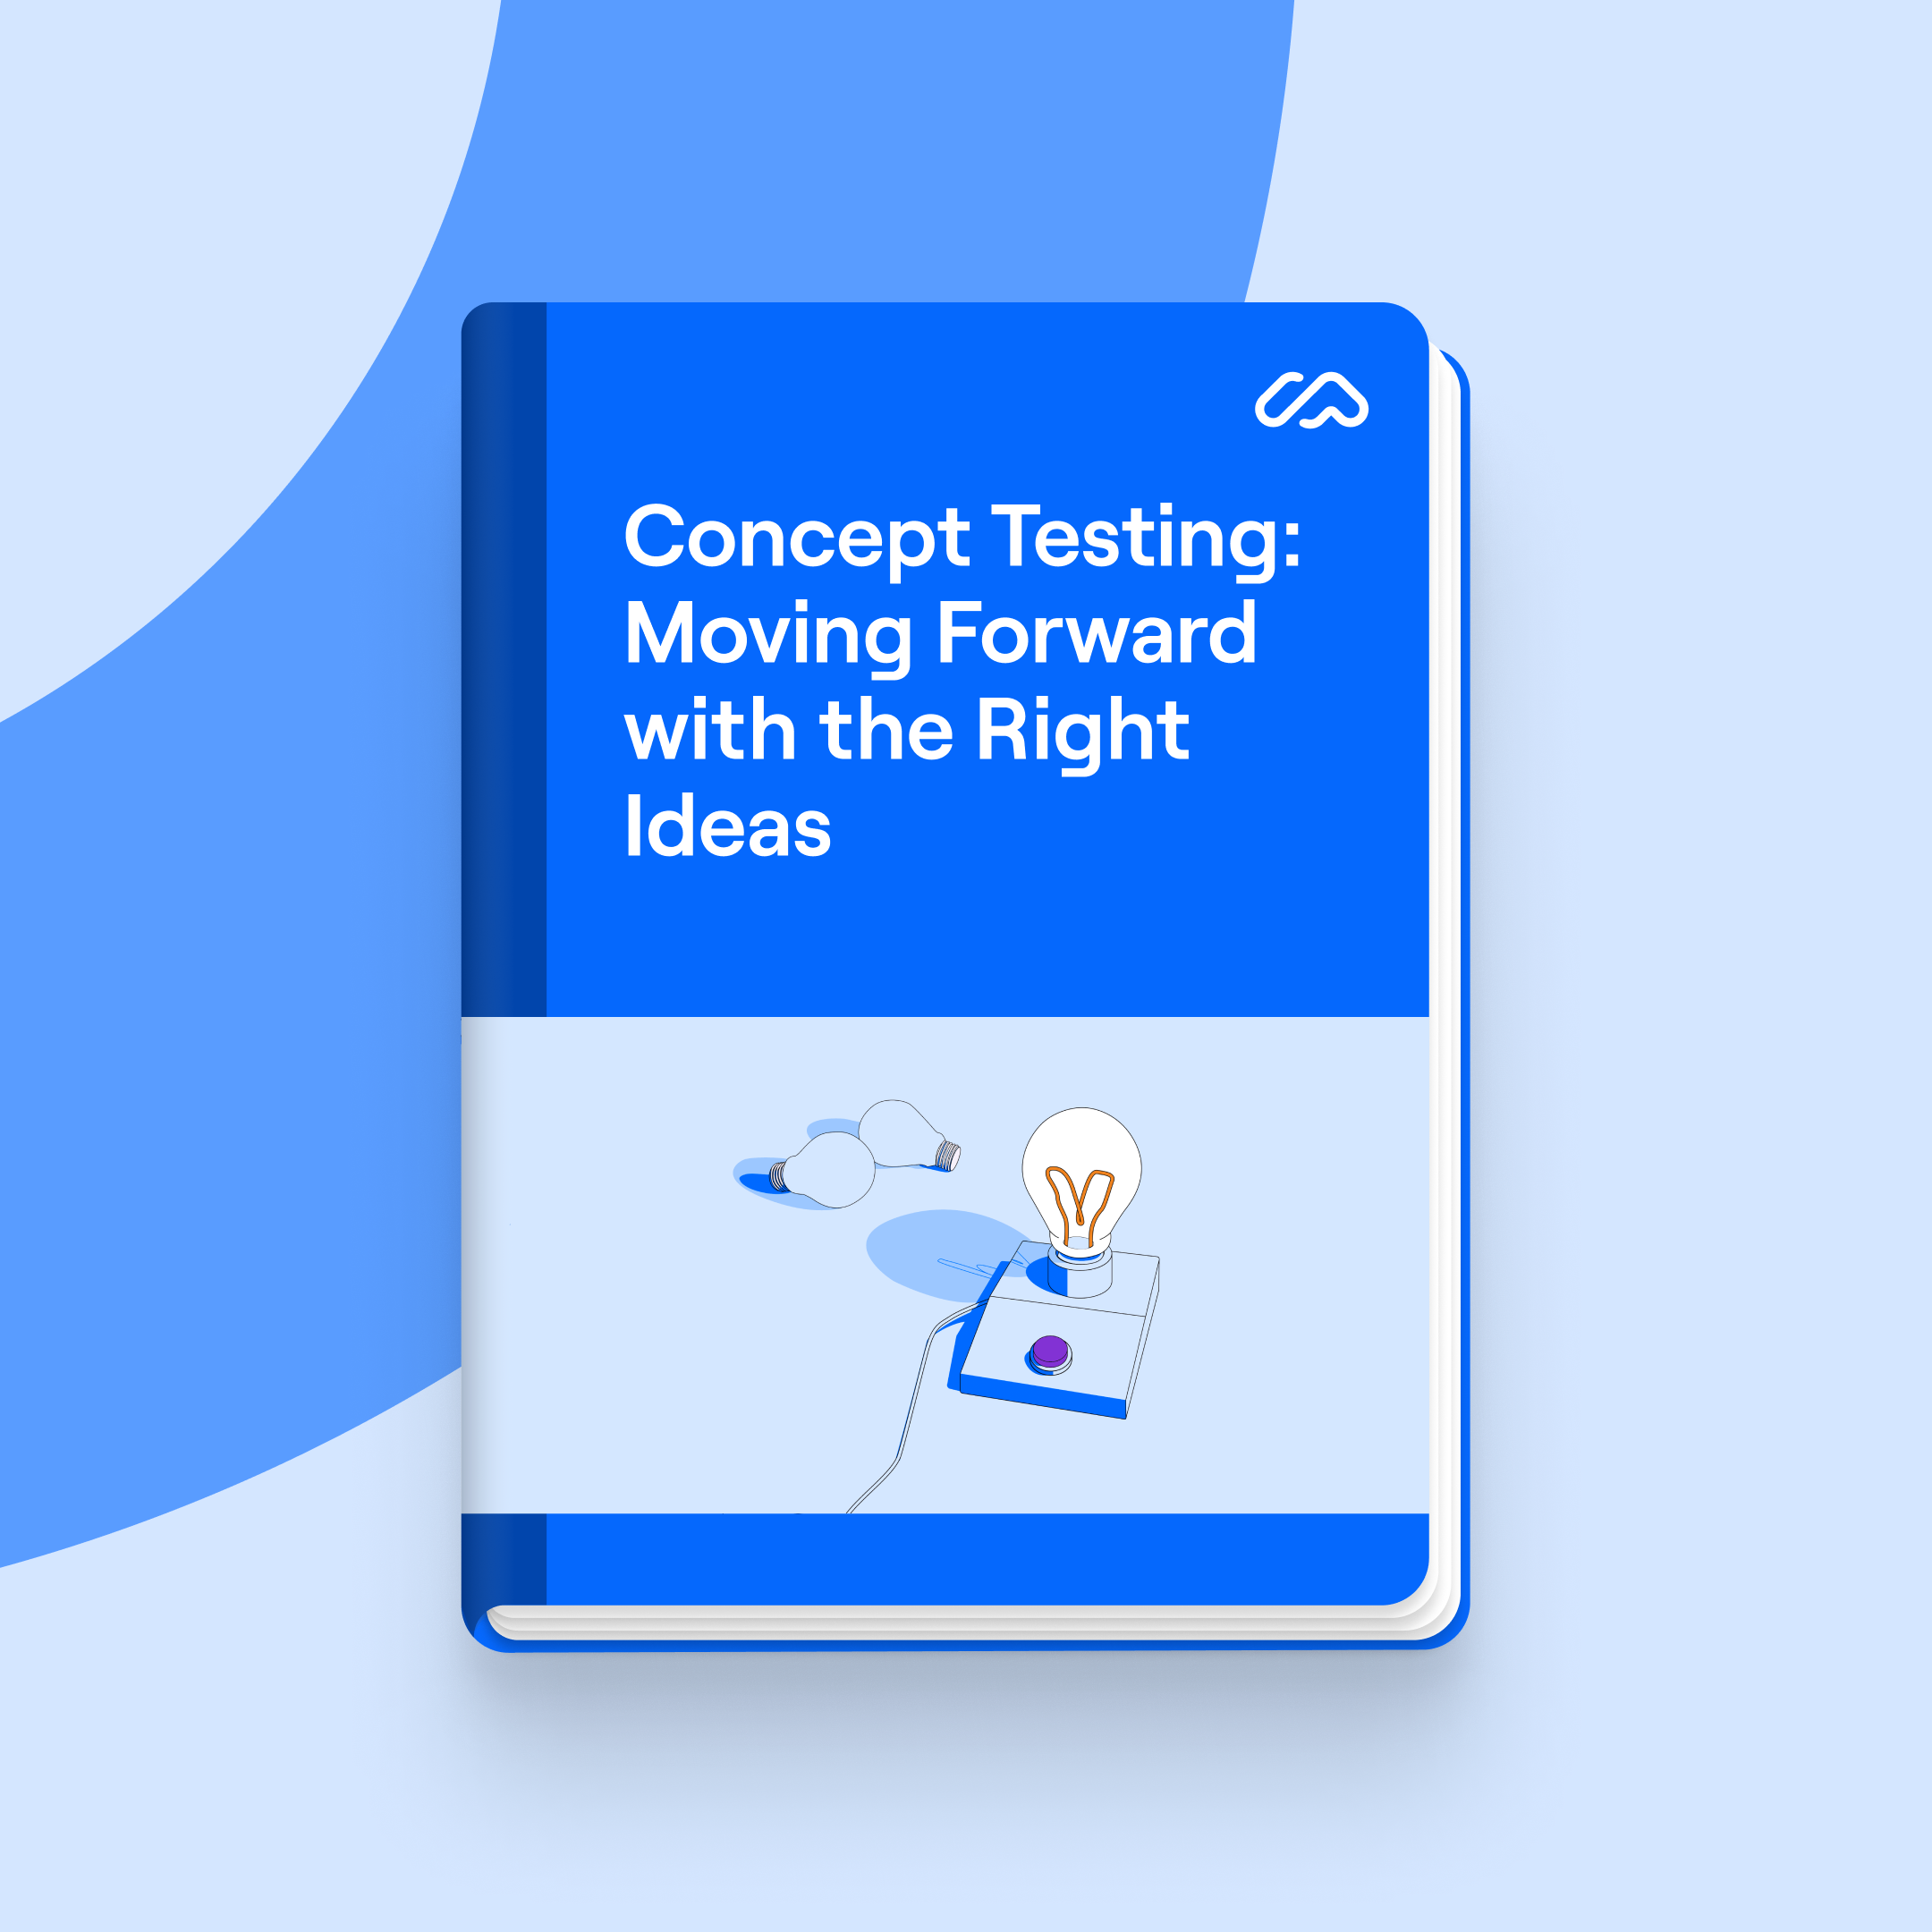 Concept Testing in UX: Moving Forward with the Right Ideas